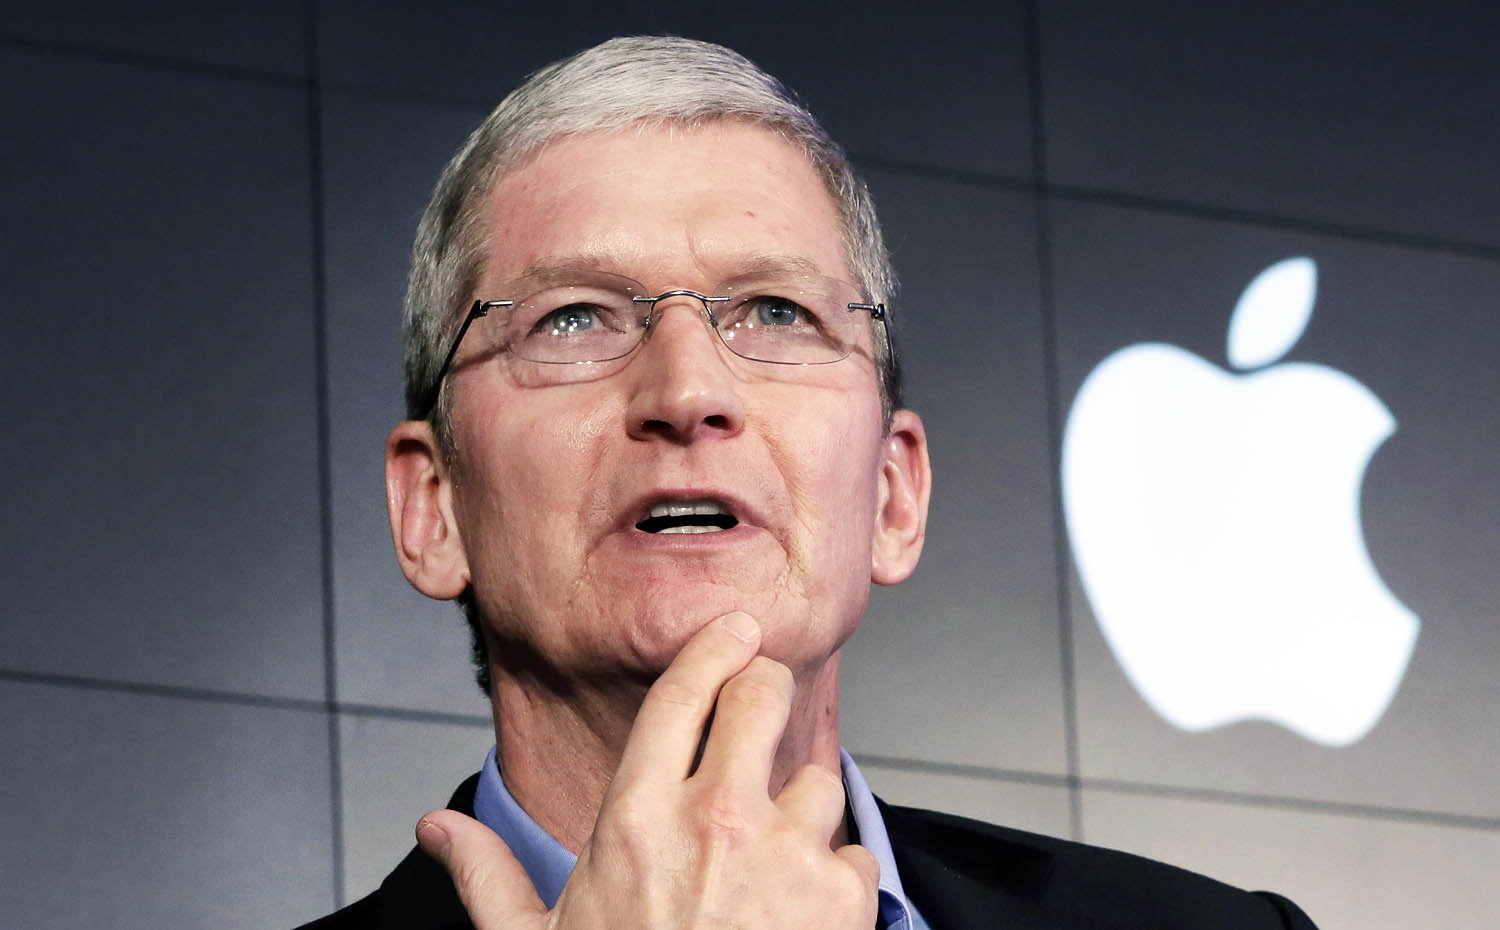 Apple CEO Tim Cook responds to a question during a news conference. Photo: Reuters